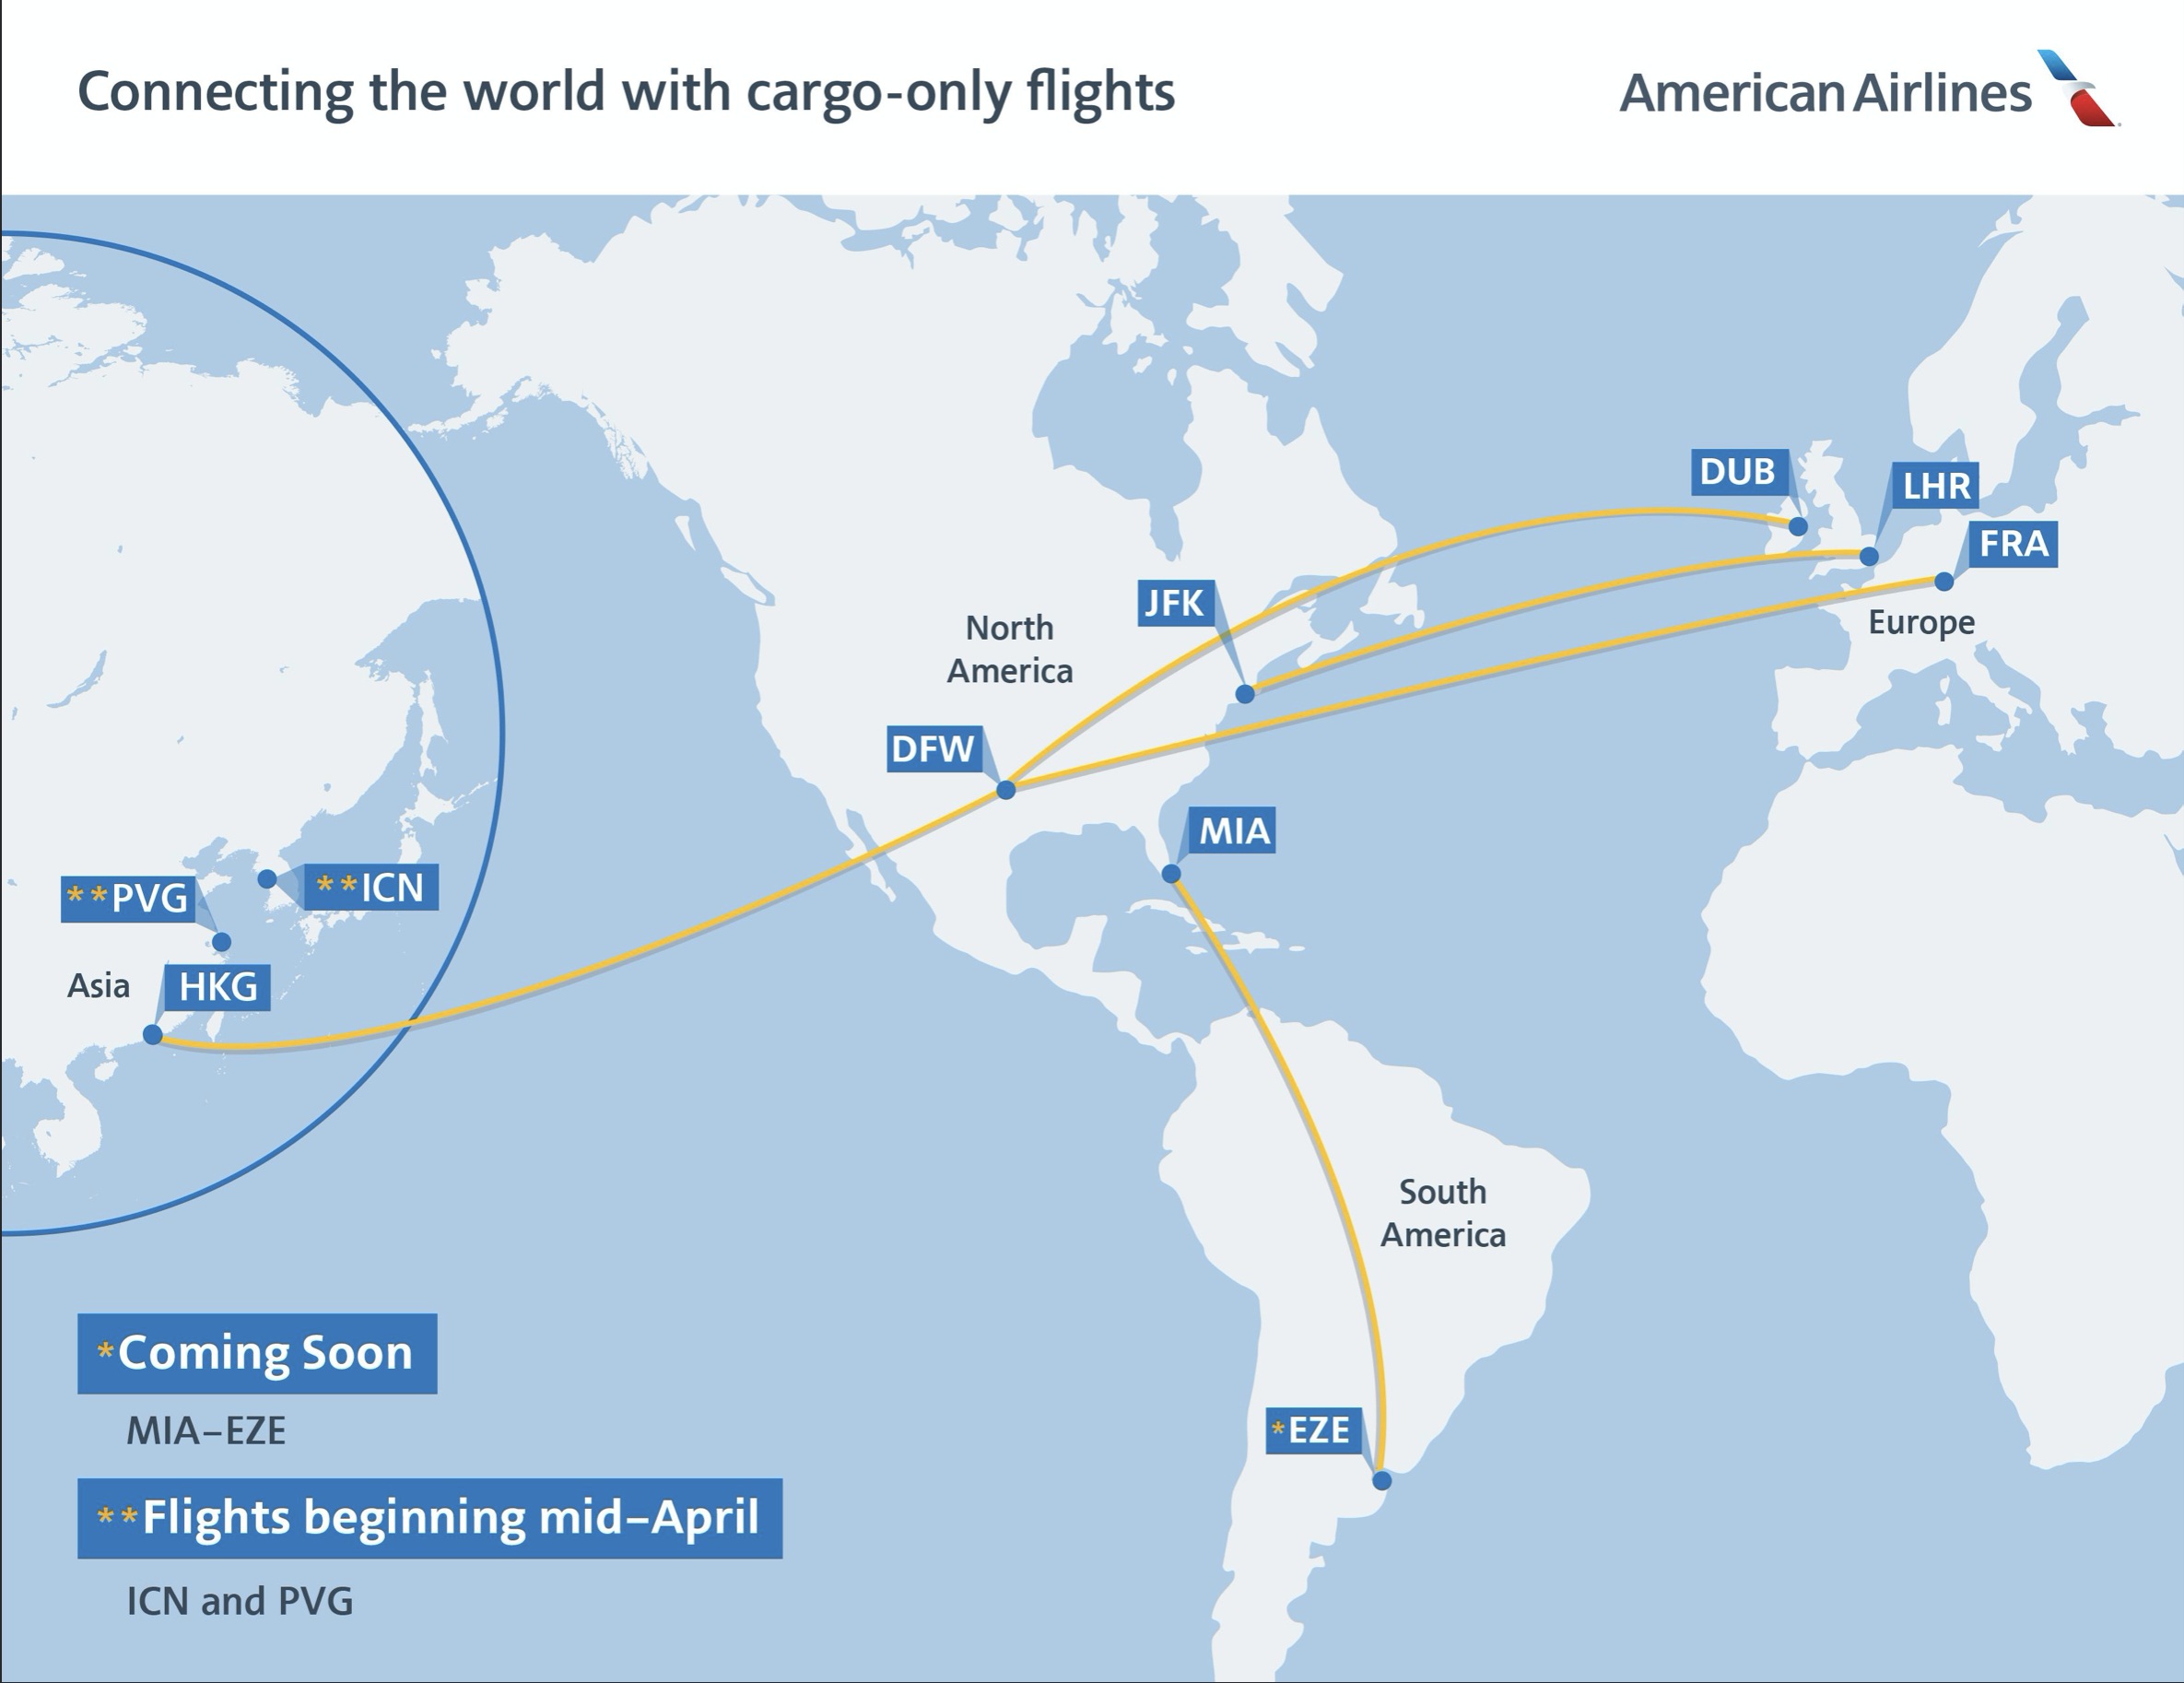 American Airlines adds more cargo-only flights